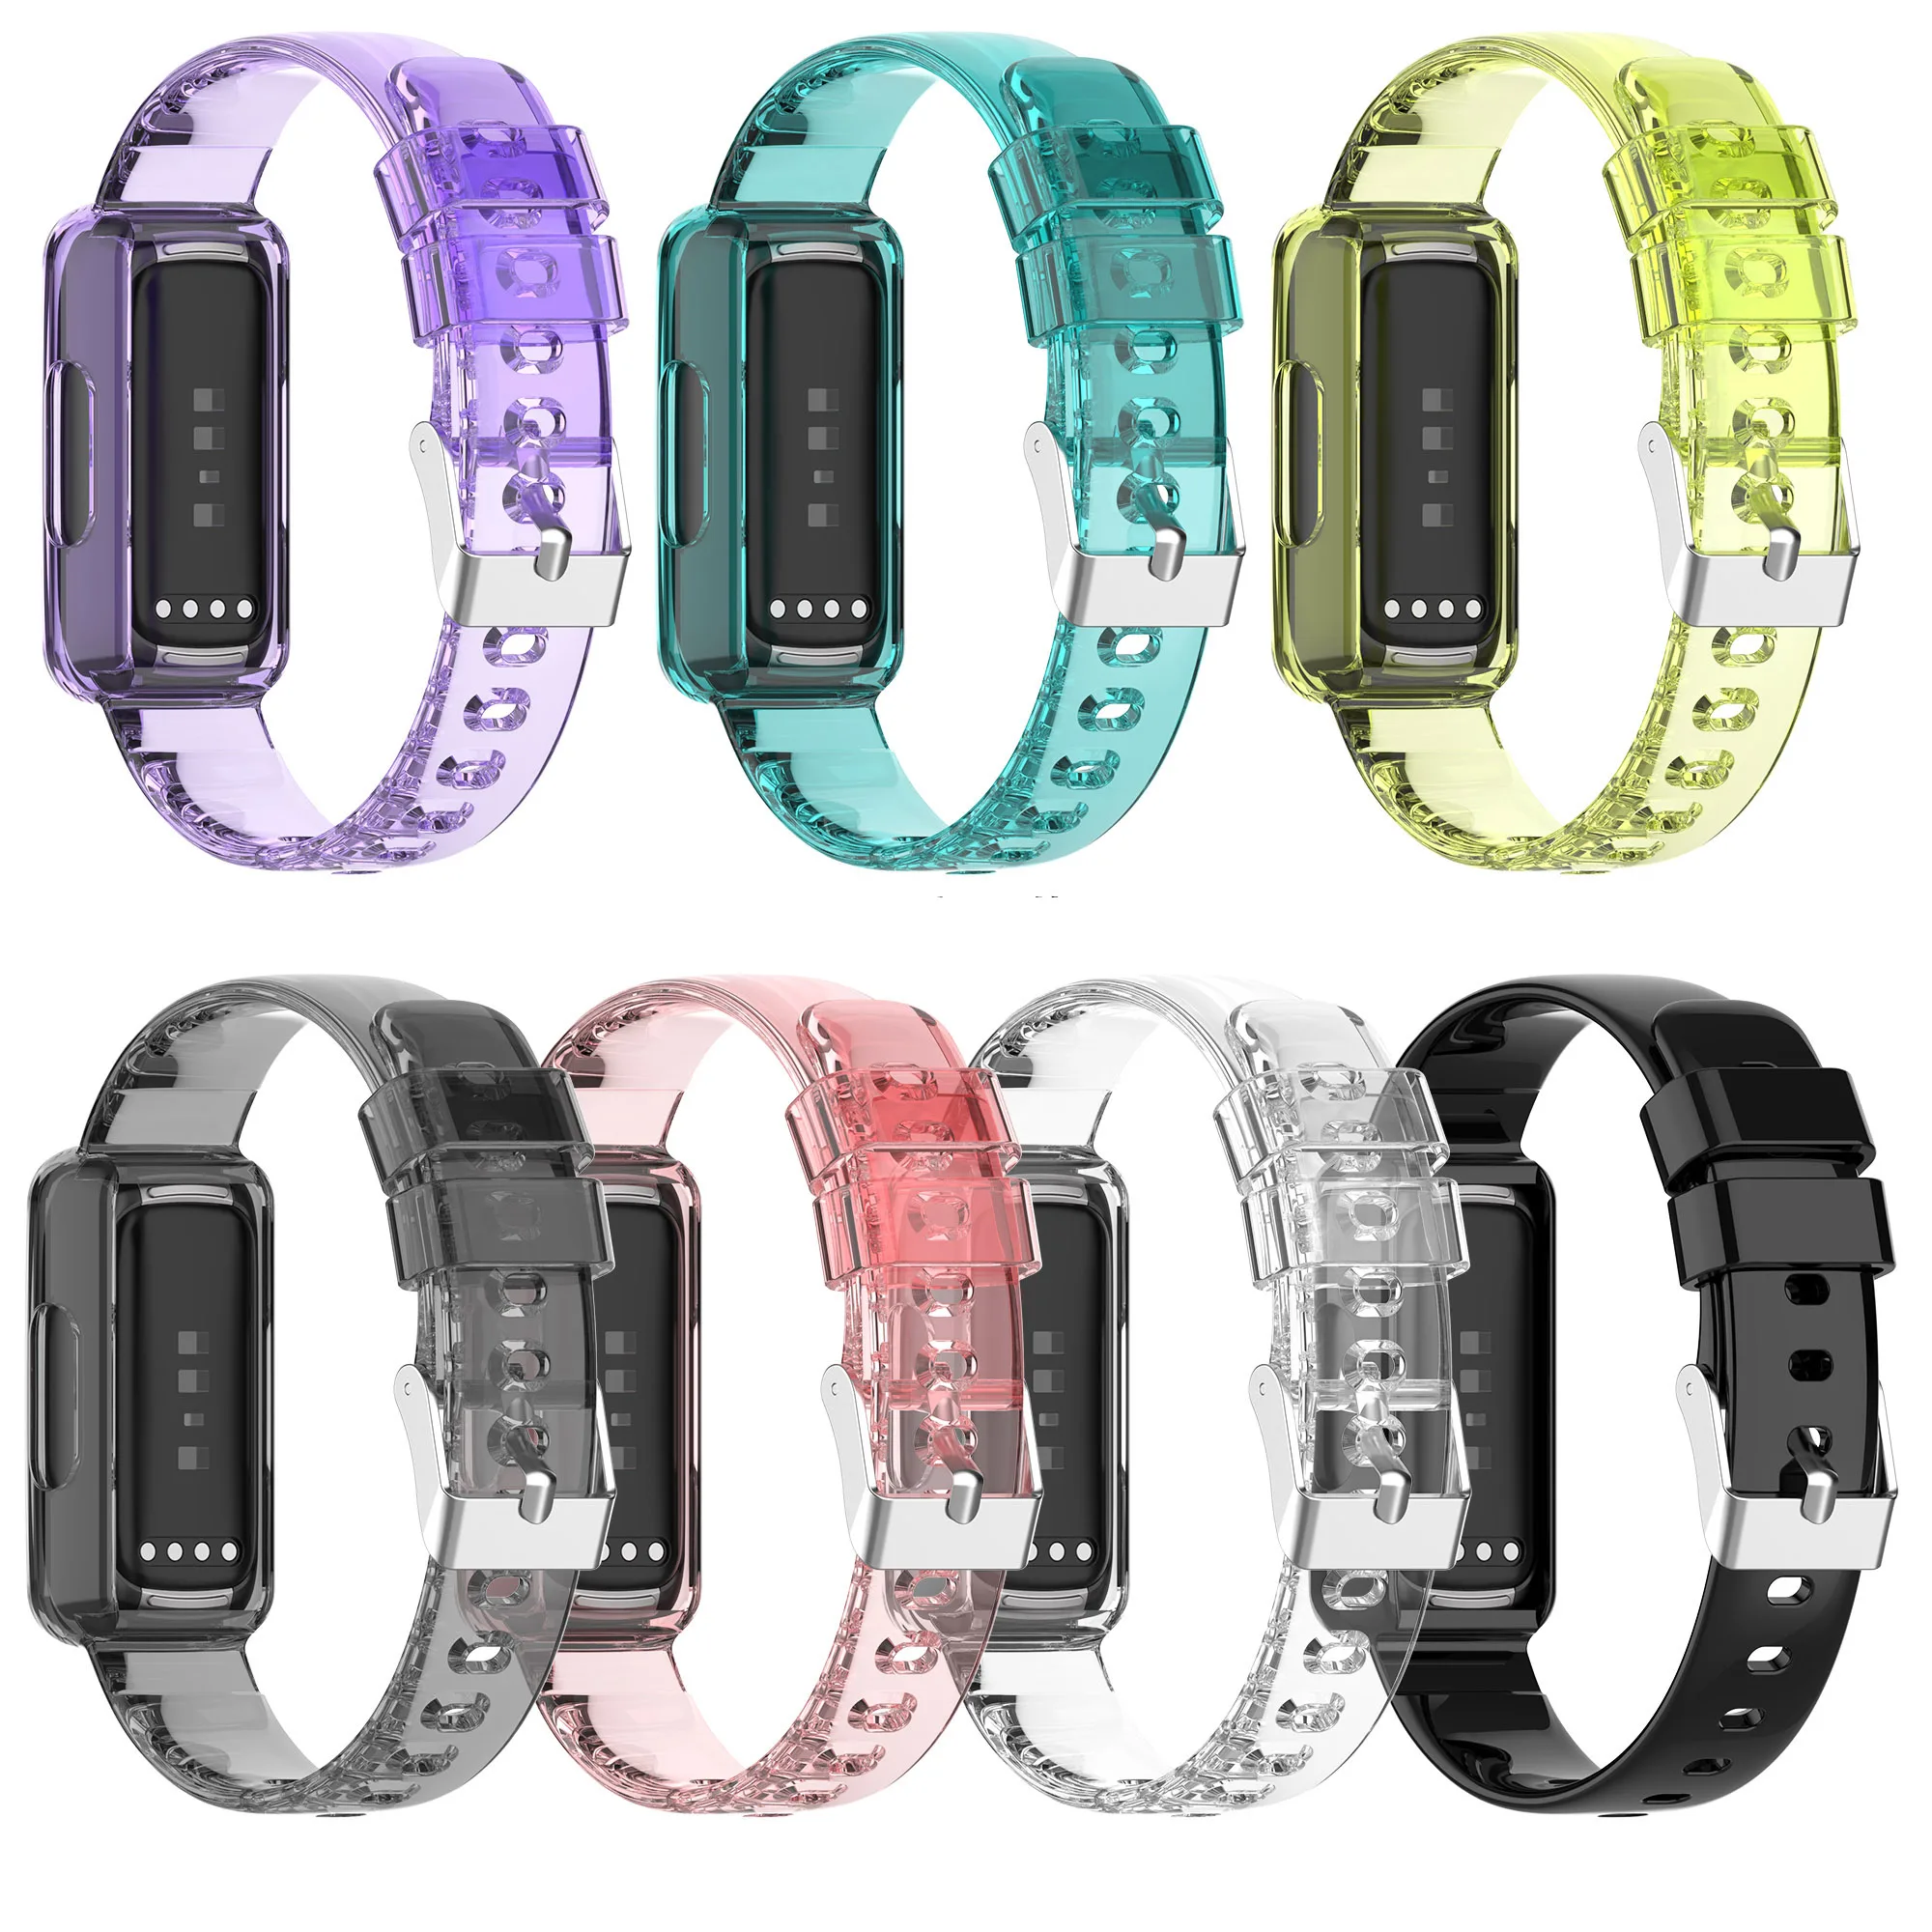 

TPU Soft Frame Transparent Wrist Strap Case For Fitbit Luxe/Inspire HR/Ace 2/3 inspire2 Ace3 Smart Band Wristband Bumper Cover